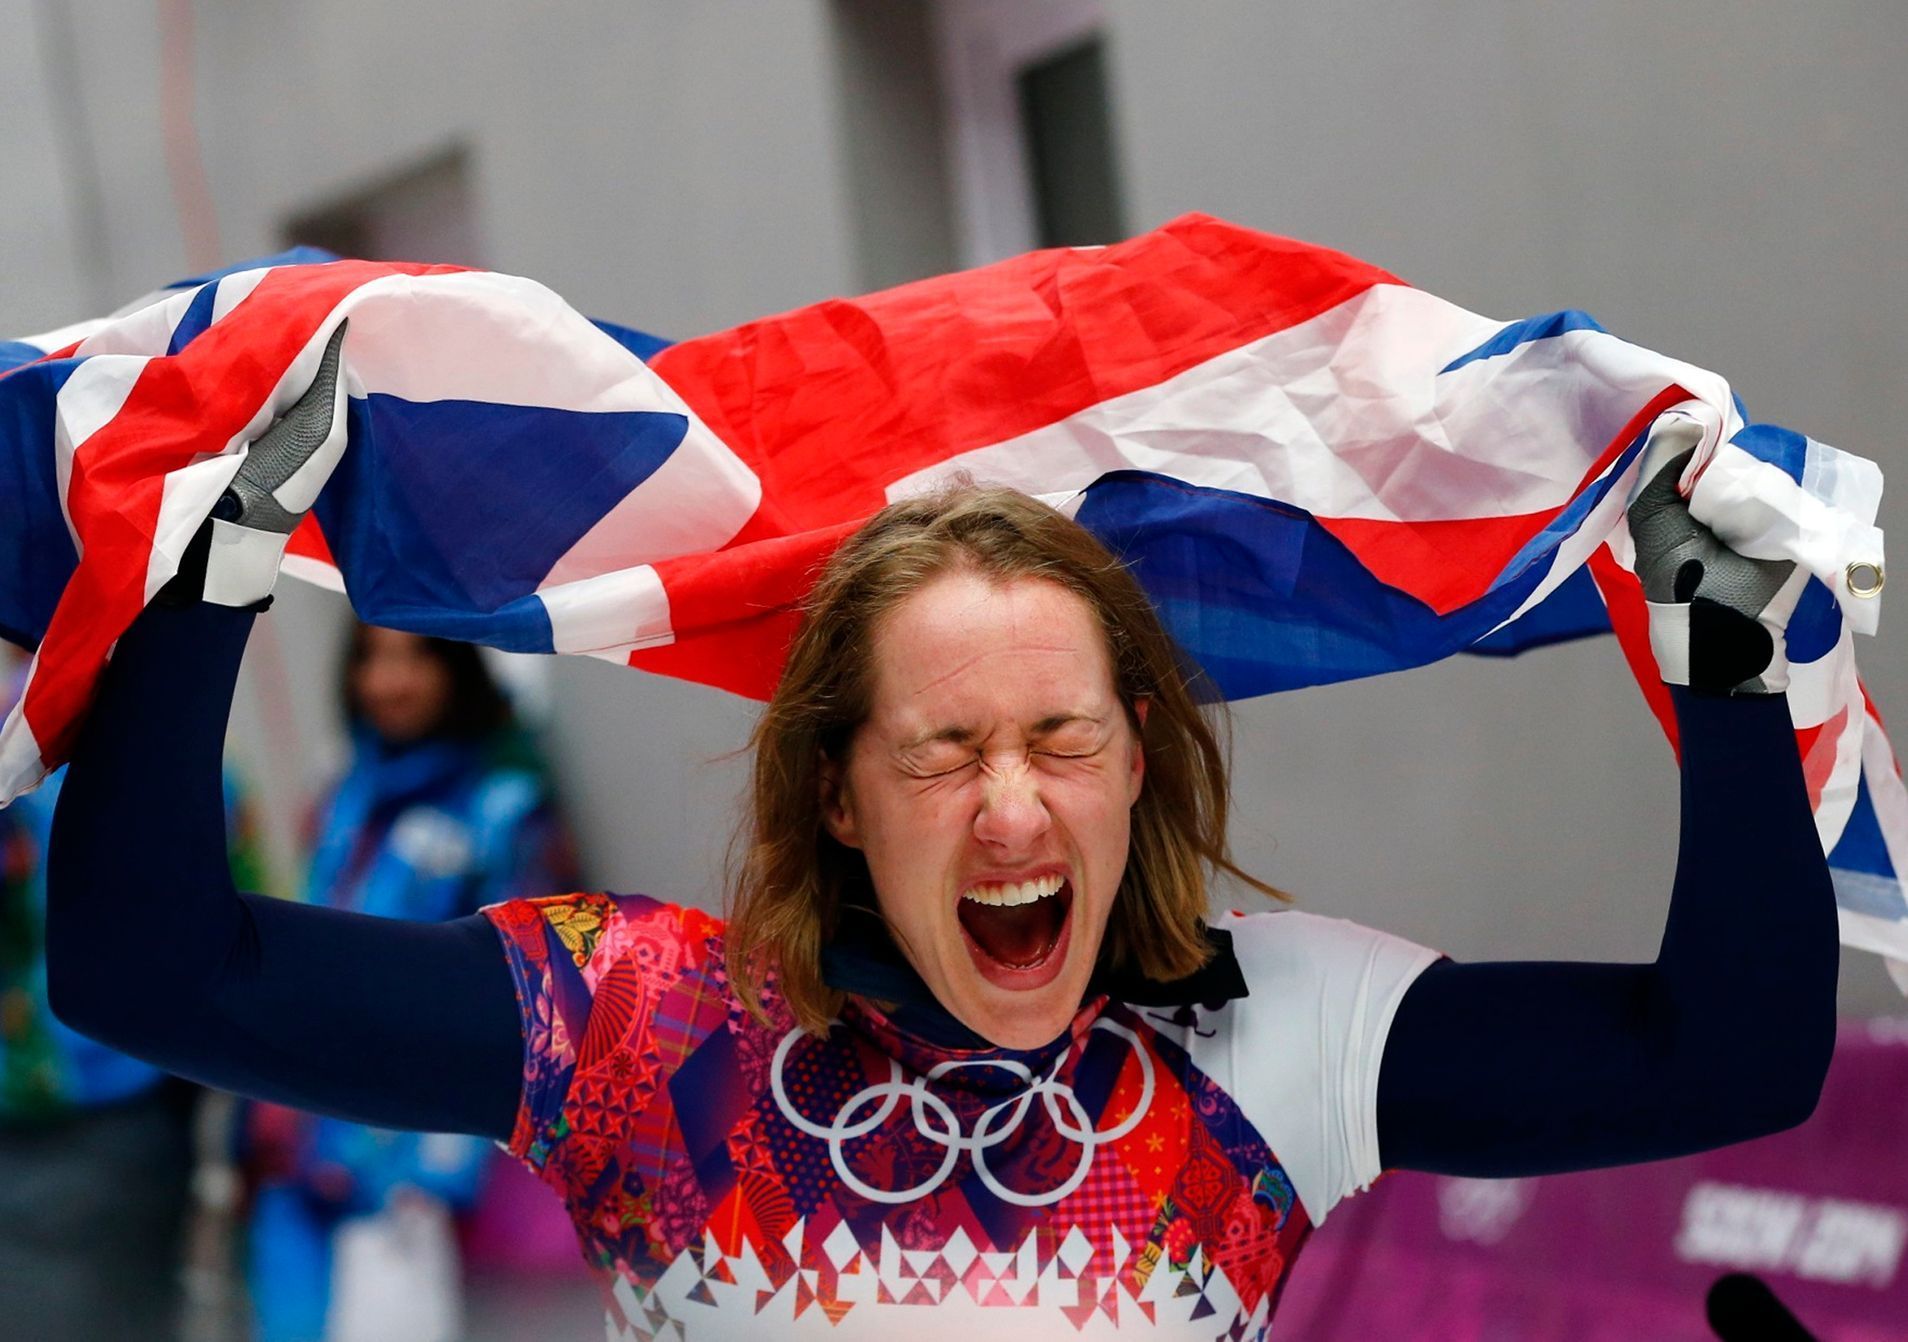 Britain's Elizabeth Yarnold celebrates with the Union flag after winning the women's skeleton event at the Sochi 2014 Winter Olympics